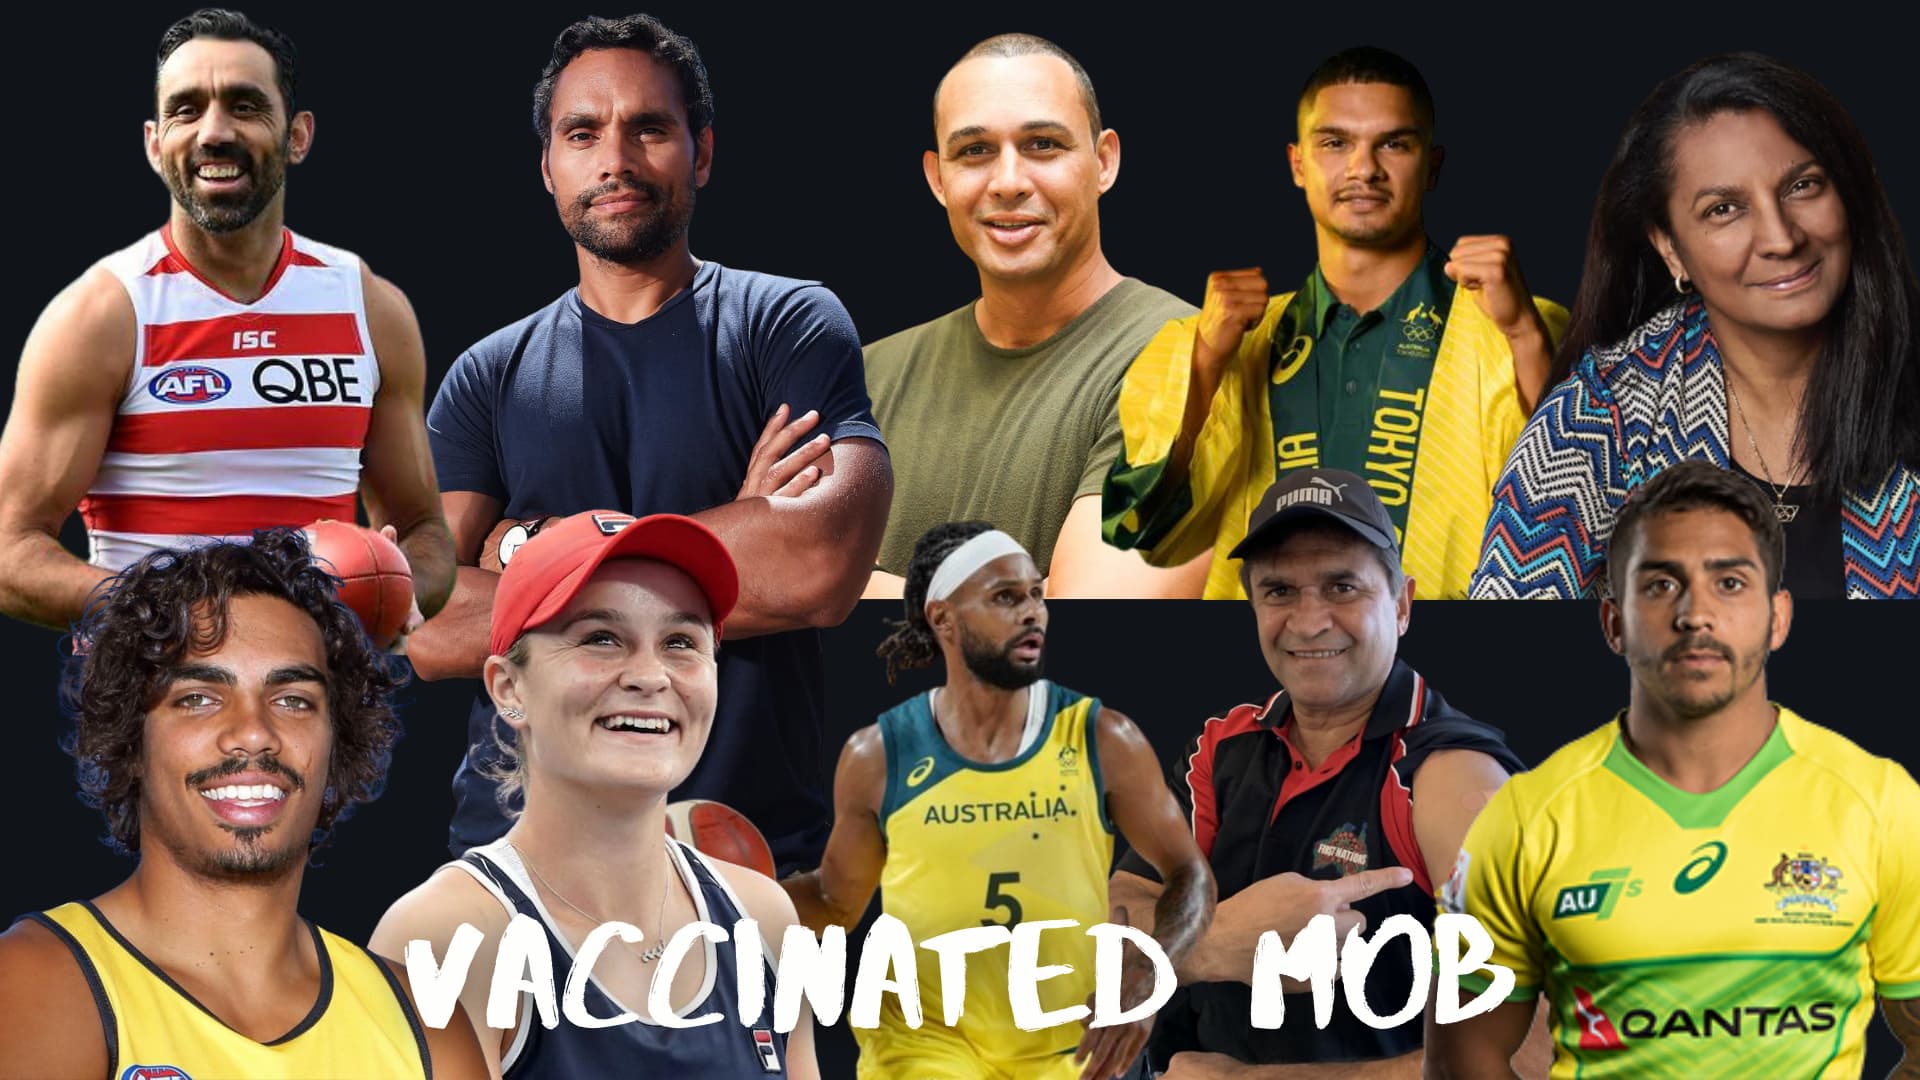 Indigenous Australian athletes and celebrities that have gotten vaxxed